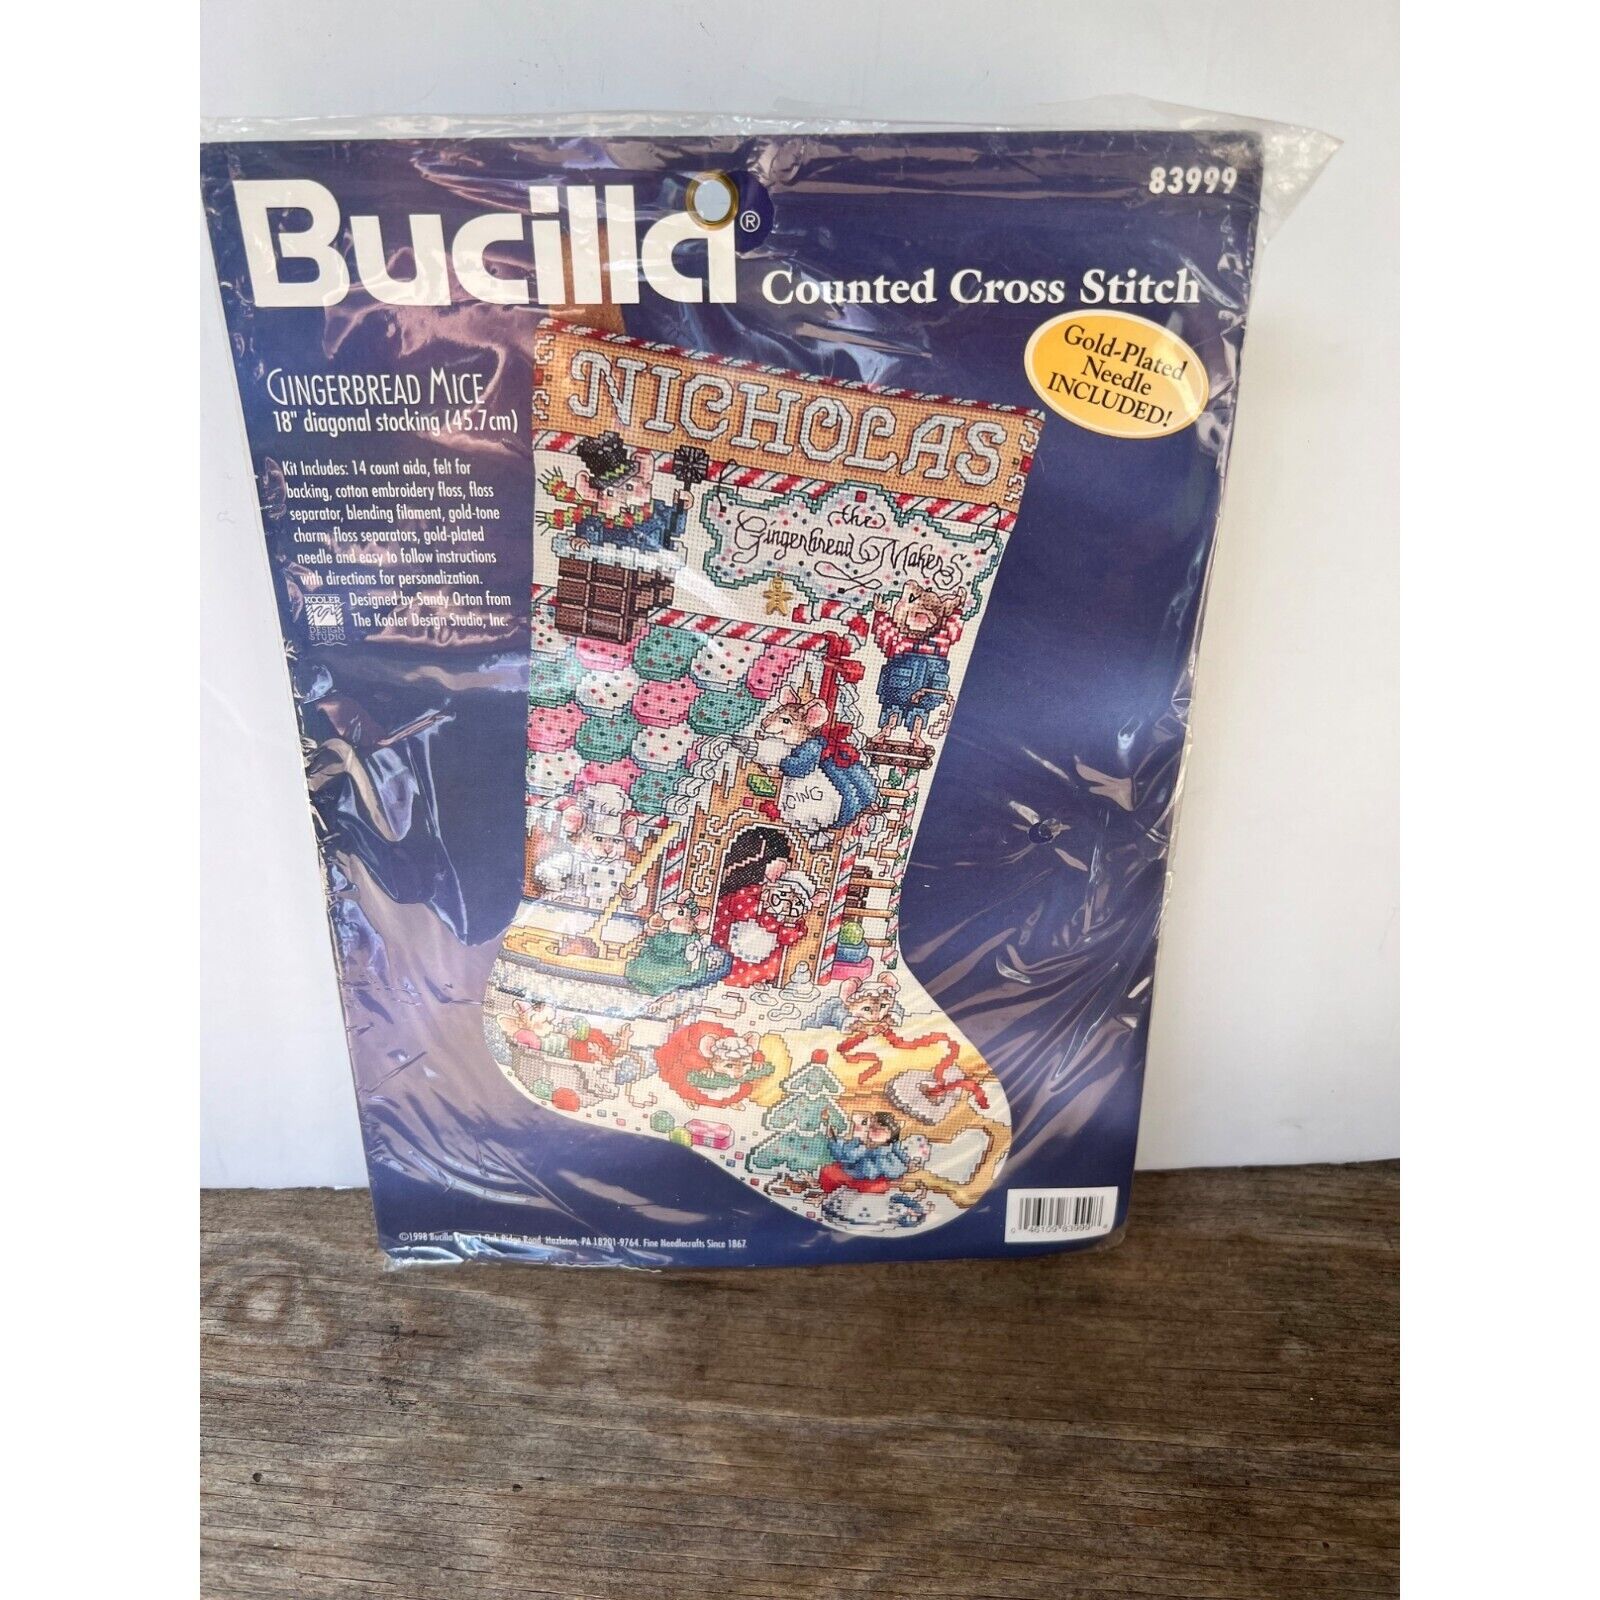 Vintage Bucilla Counted cross stitch Gingerbread Mice 83999